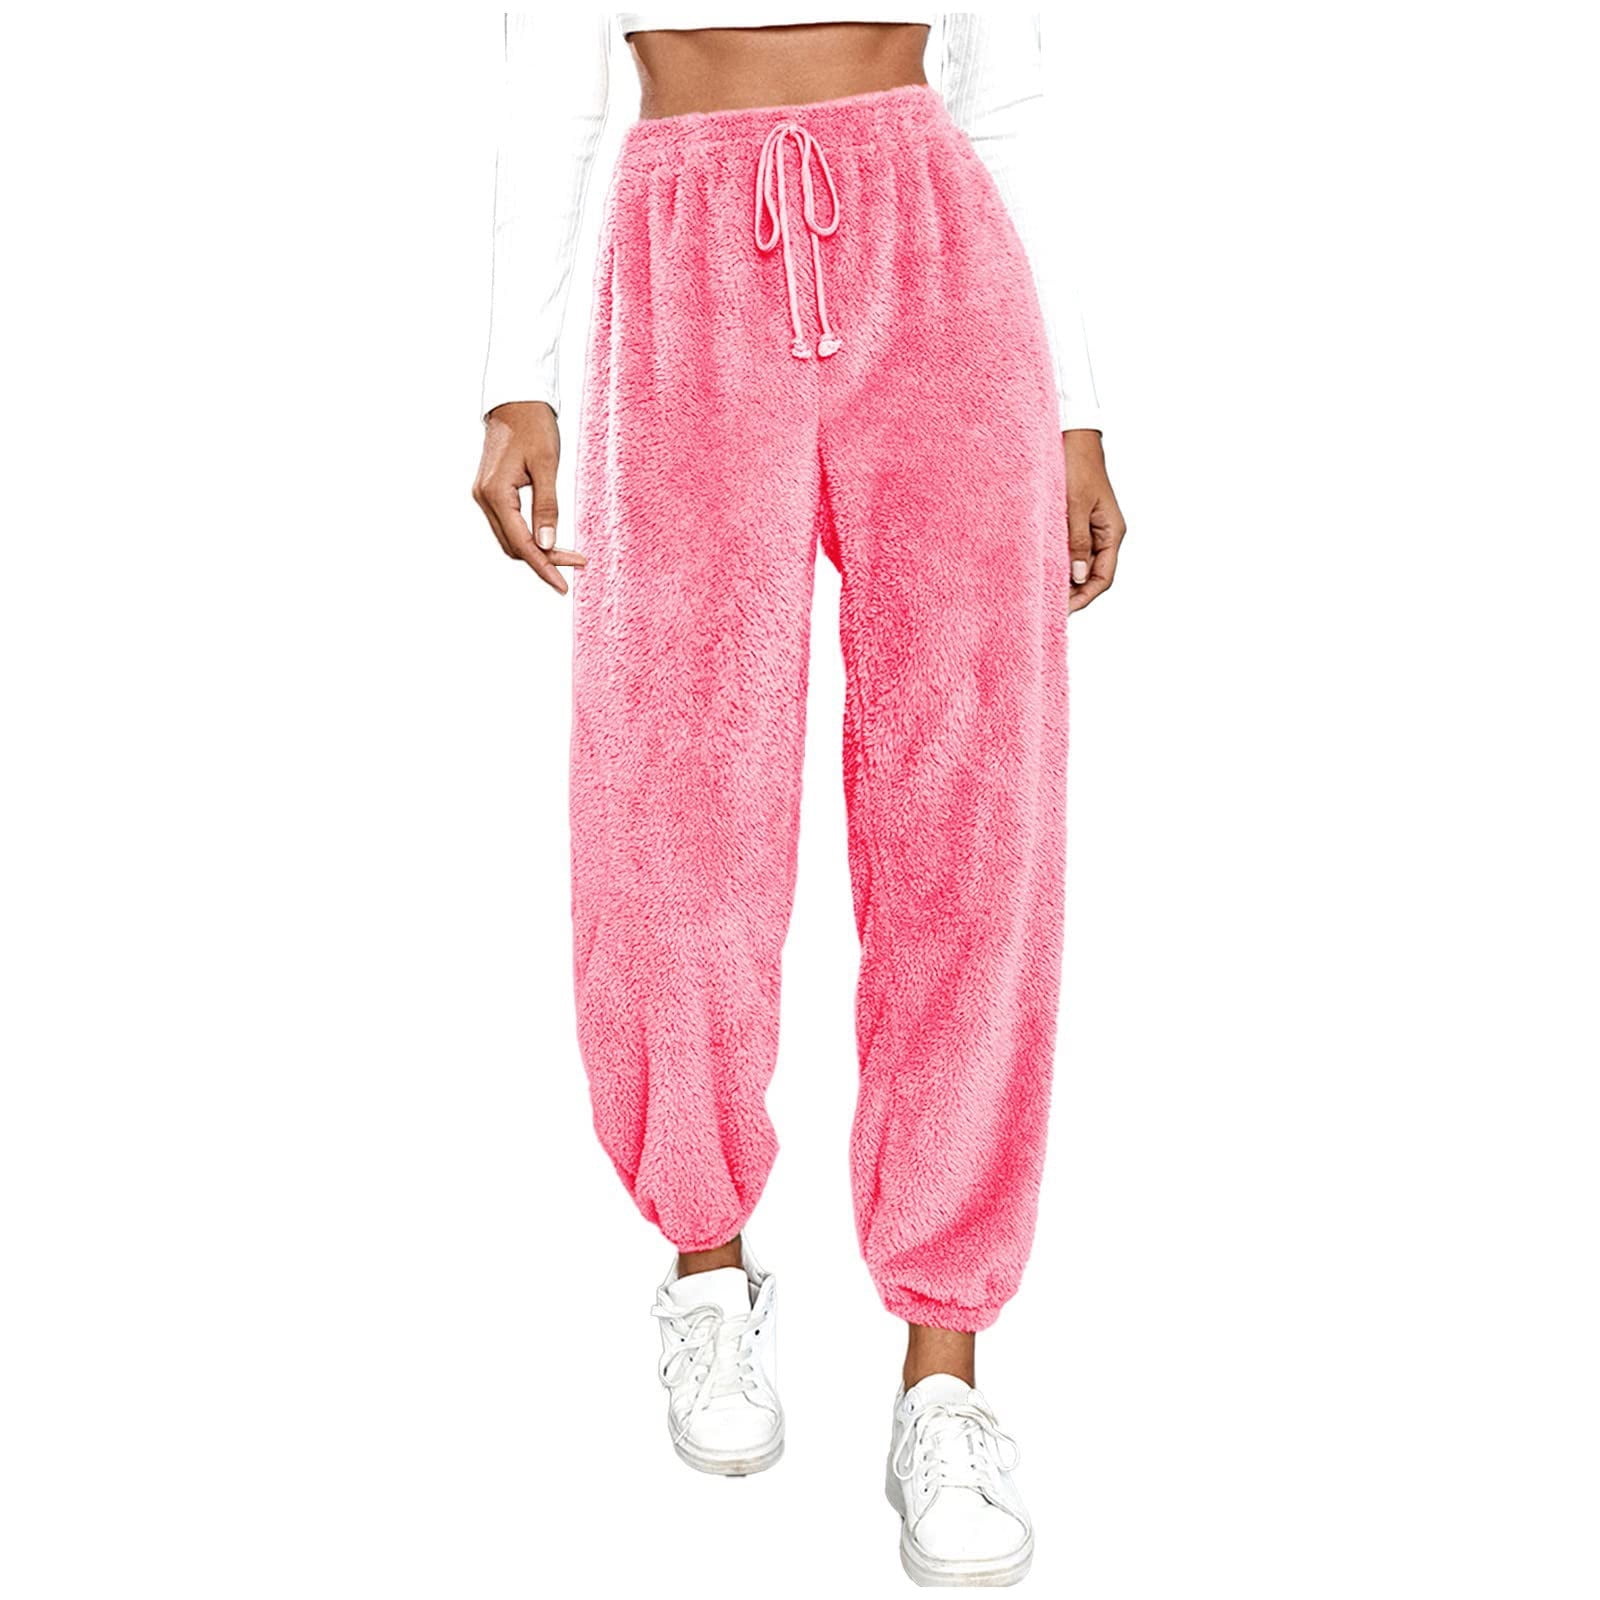 RQYYD Womens Drawstring Fuzzy Fleece Pants Plus Size Winter Warm Thicken  Jogger Athletic Sweatpants for Ladies Comfy Soft Plush Pajama Pants Hot  Pink